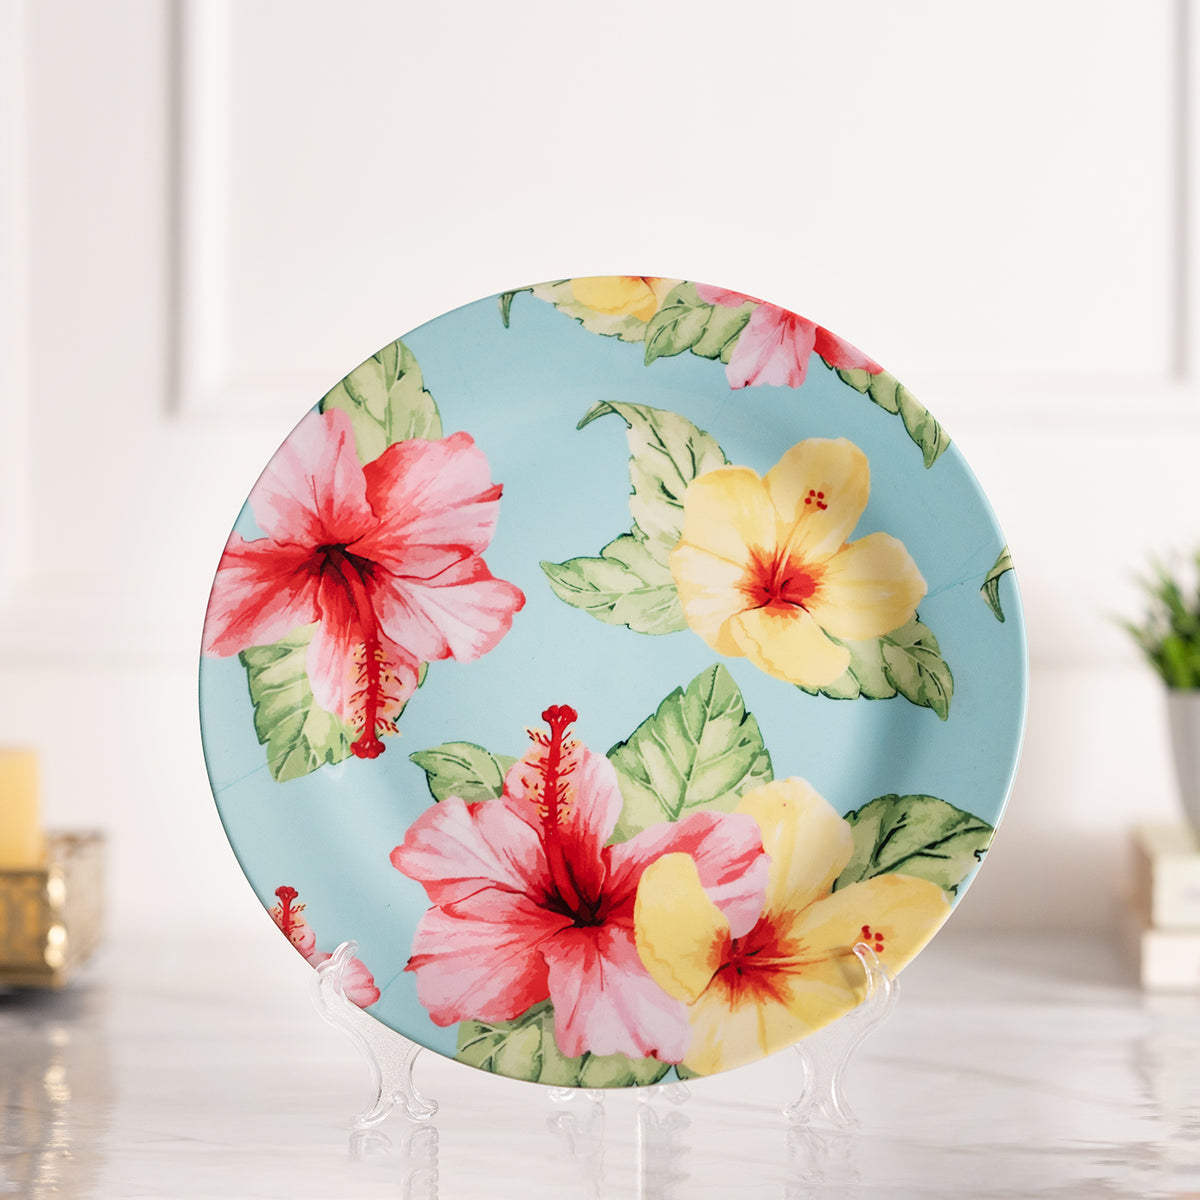 Floral print Ceramic wall plates decor hanging / tabletop